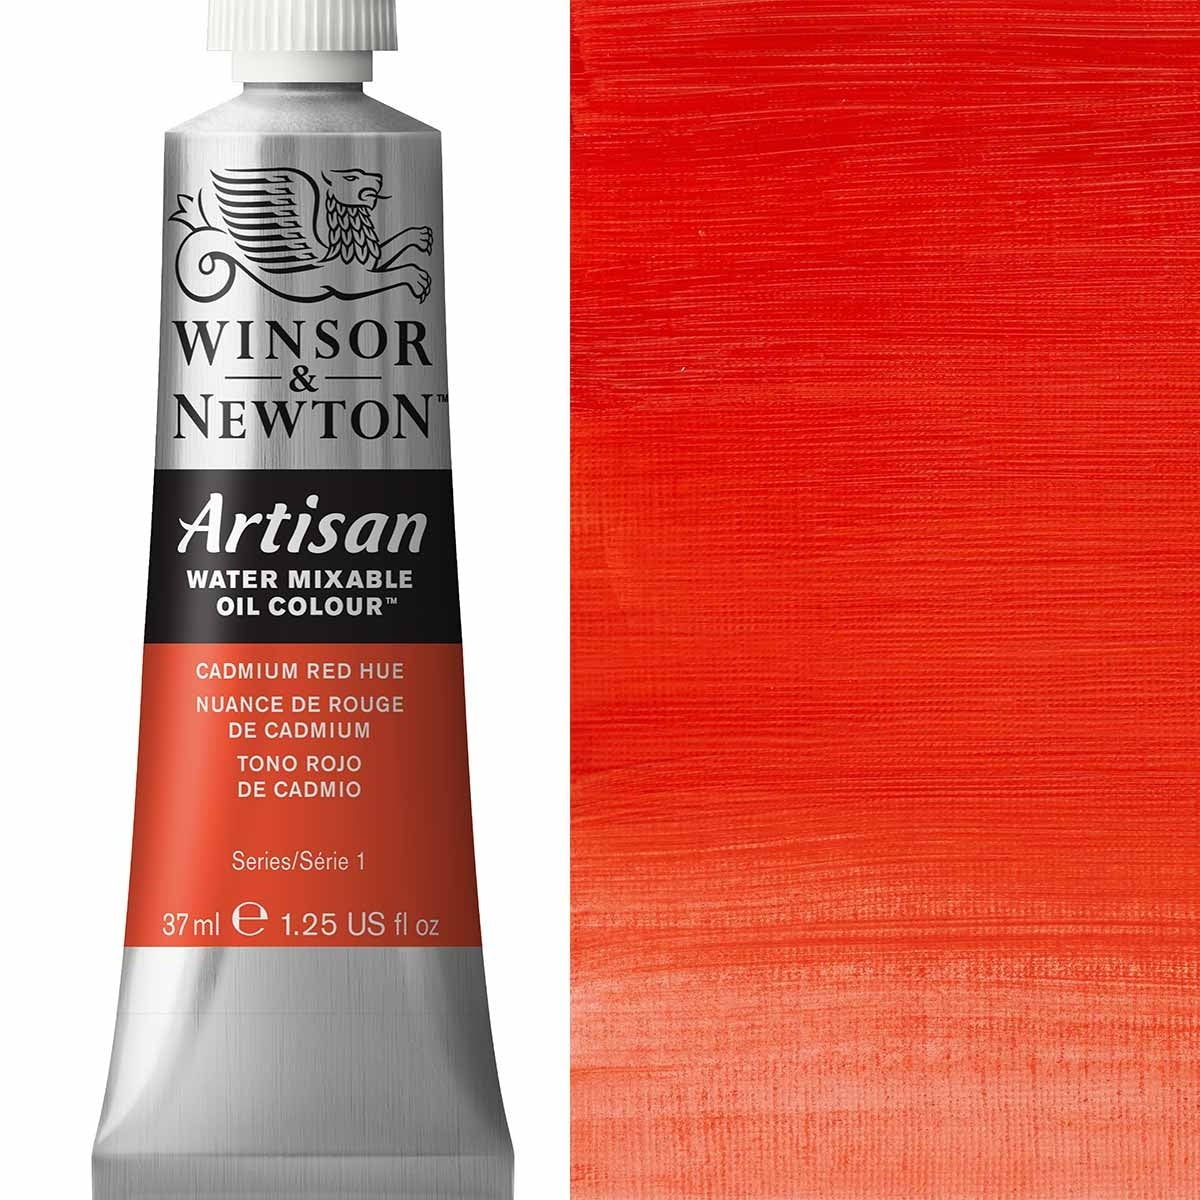 Winsor and Newton - Artisan Oil Colour Watermixable - 37ml - Cadmium Red Hue